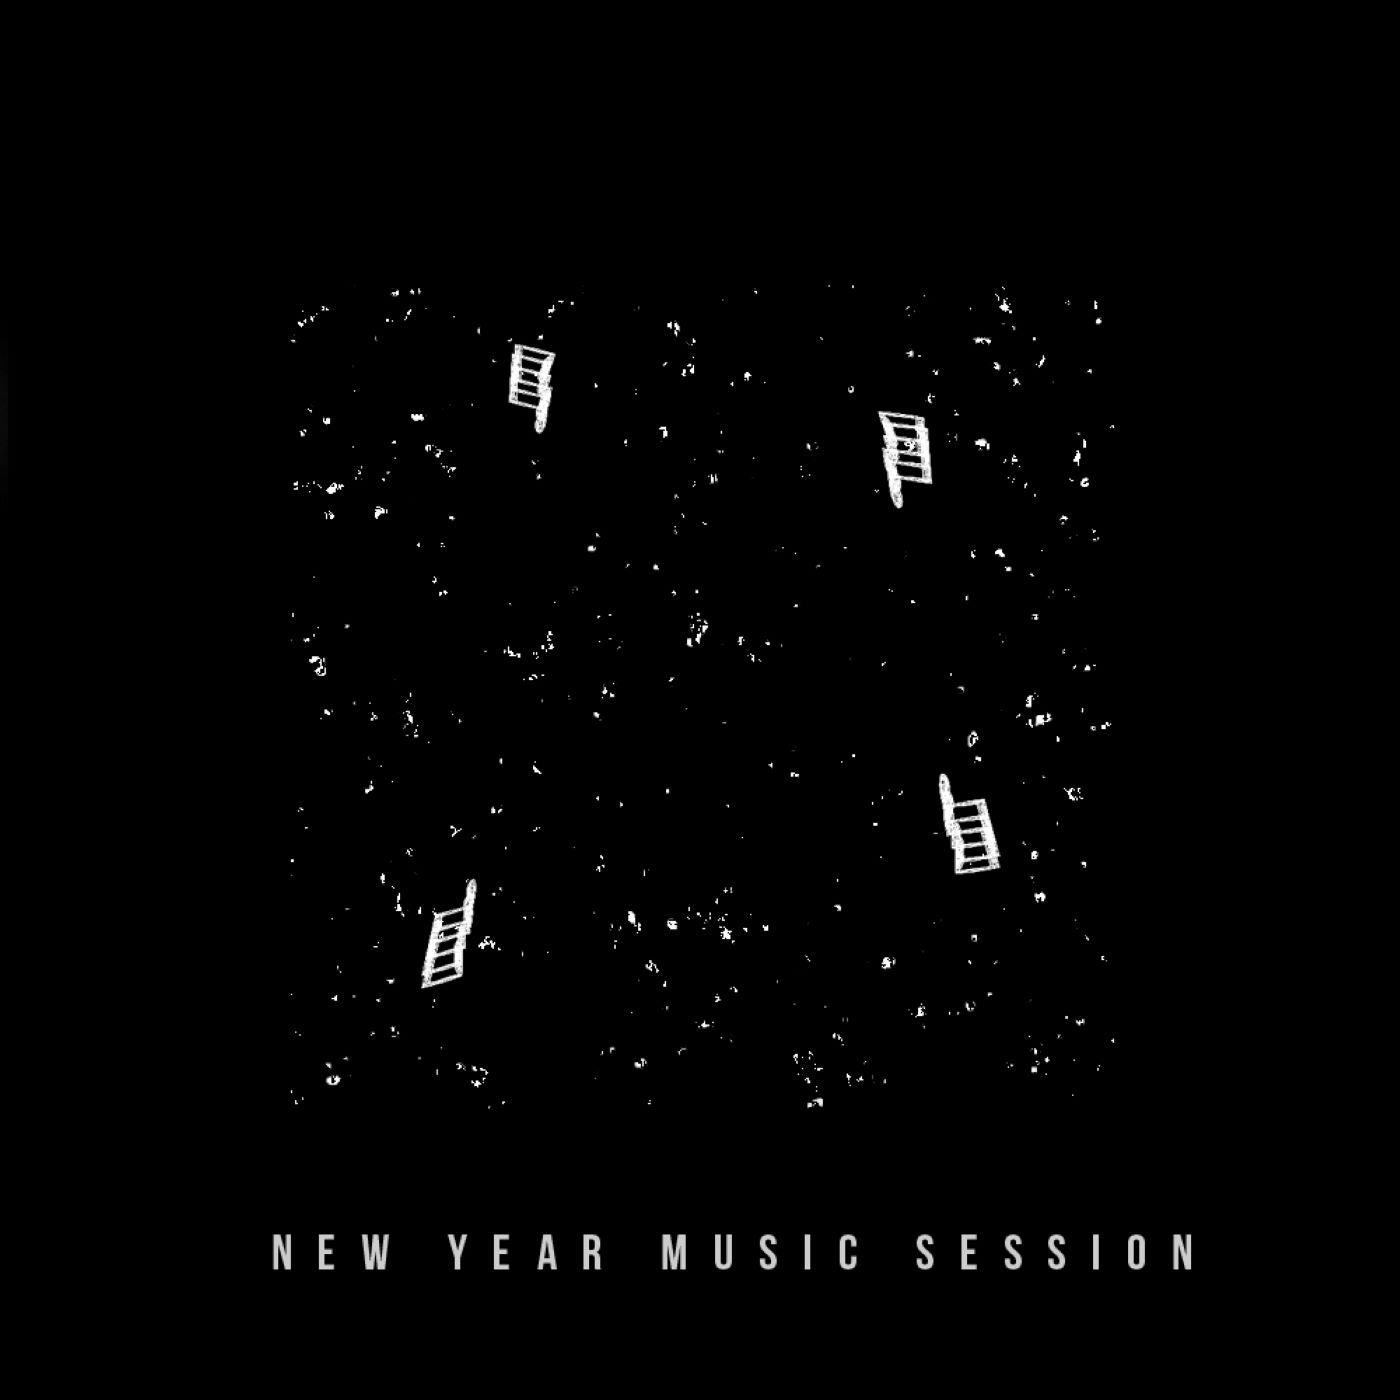 New Year Music Session